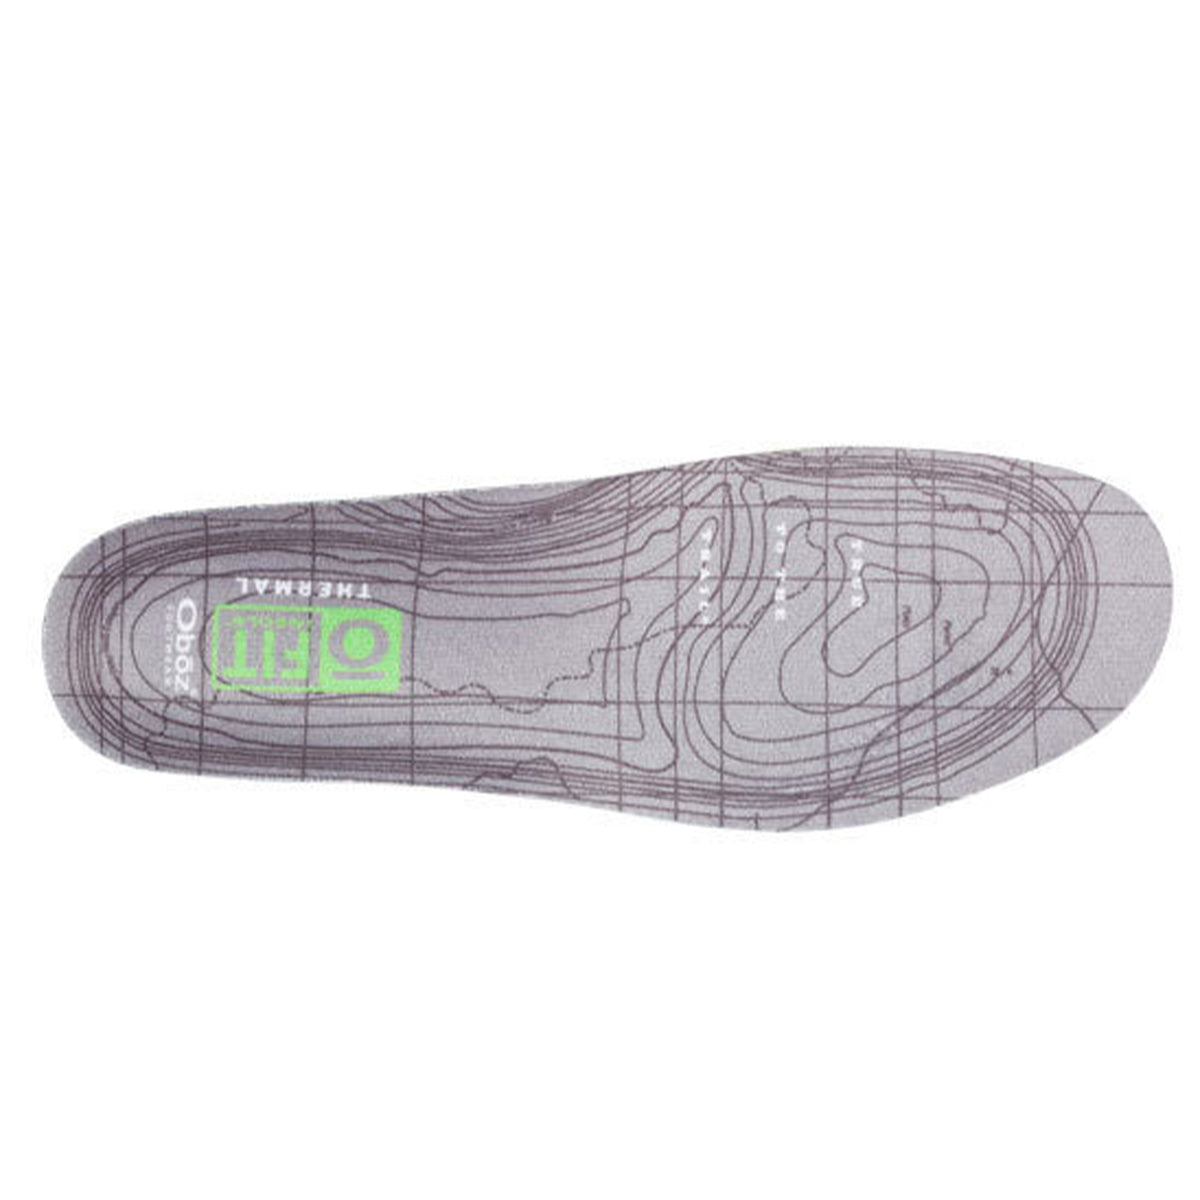 Oboz O Fit Insoles Plus Medium Arch Thermal